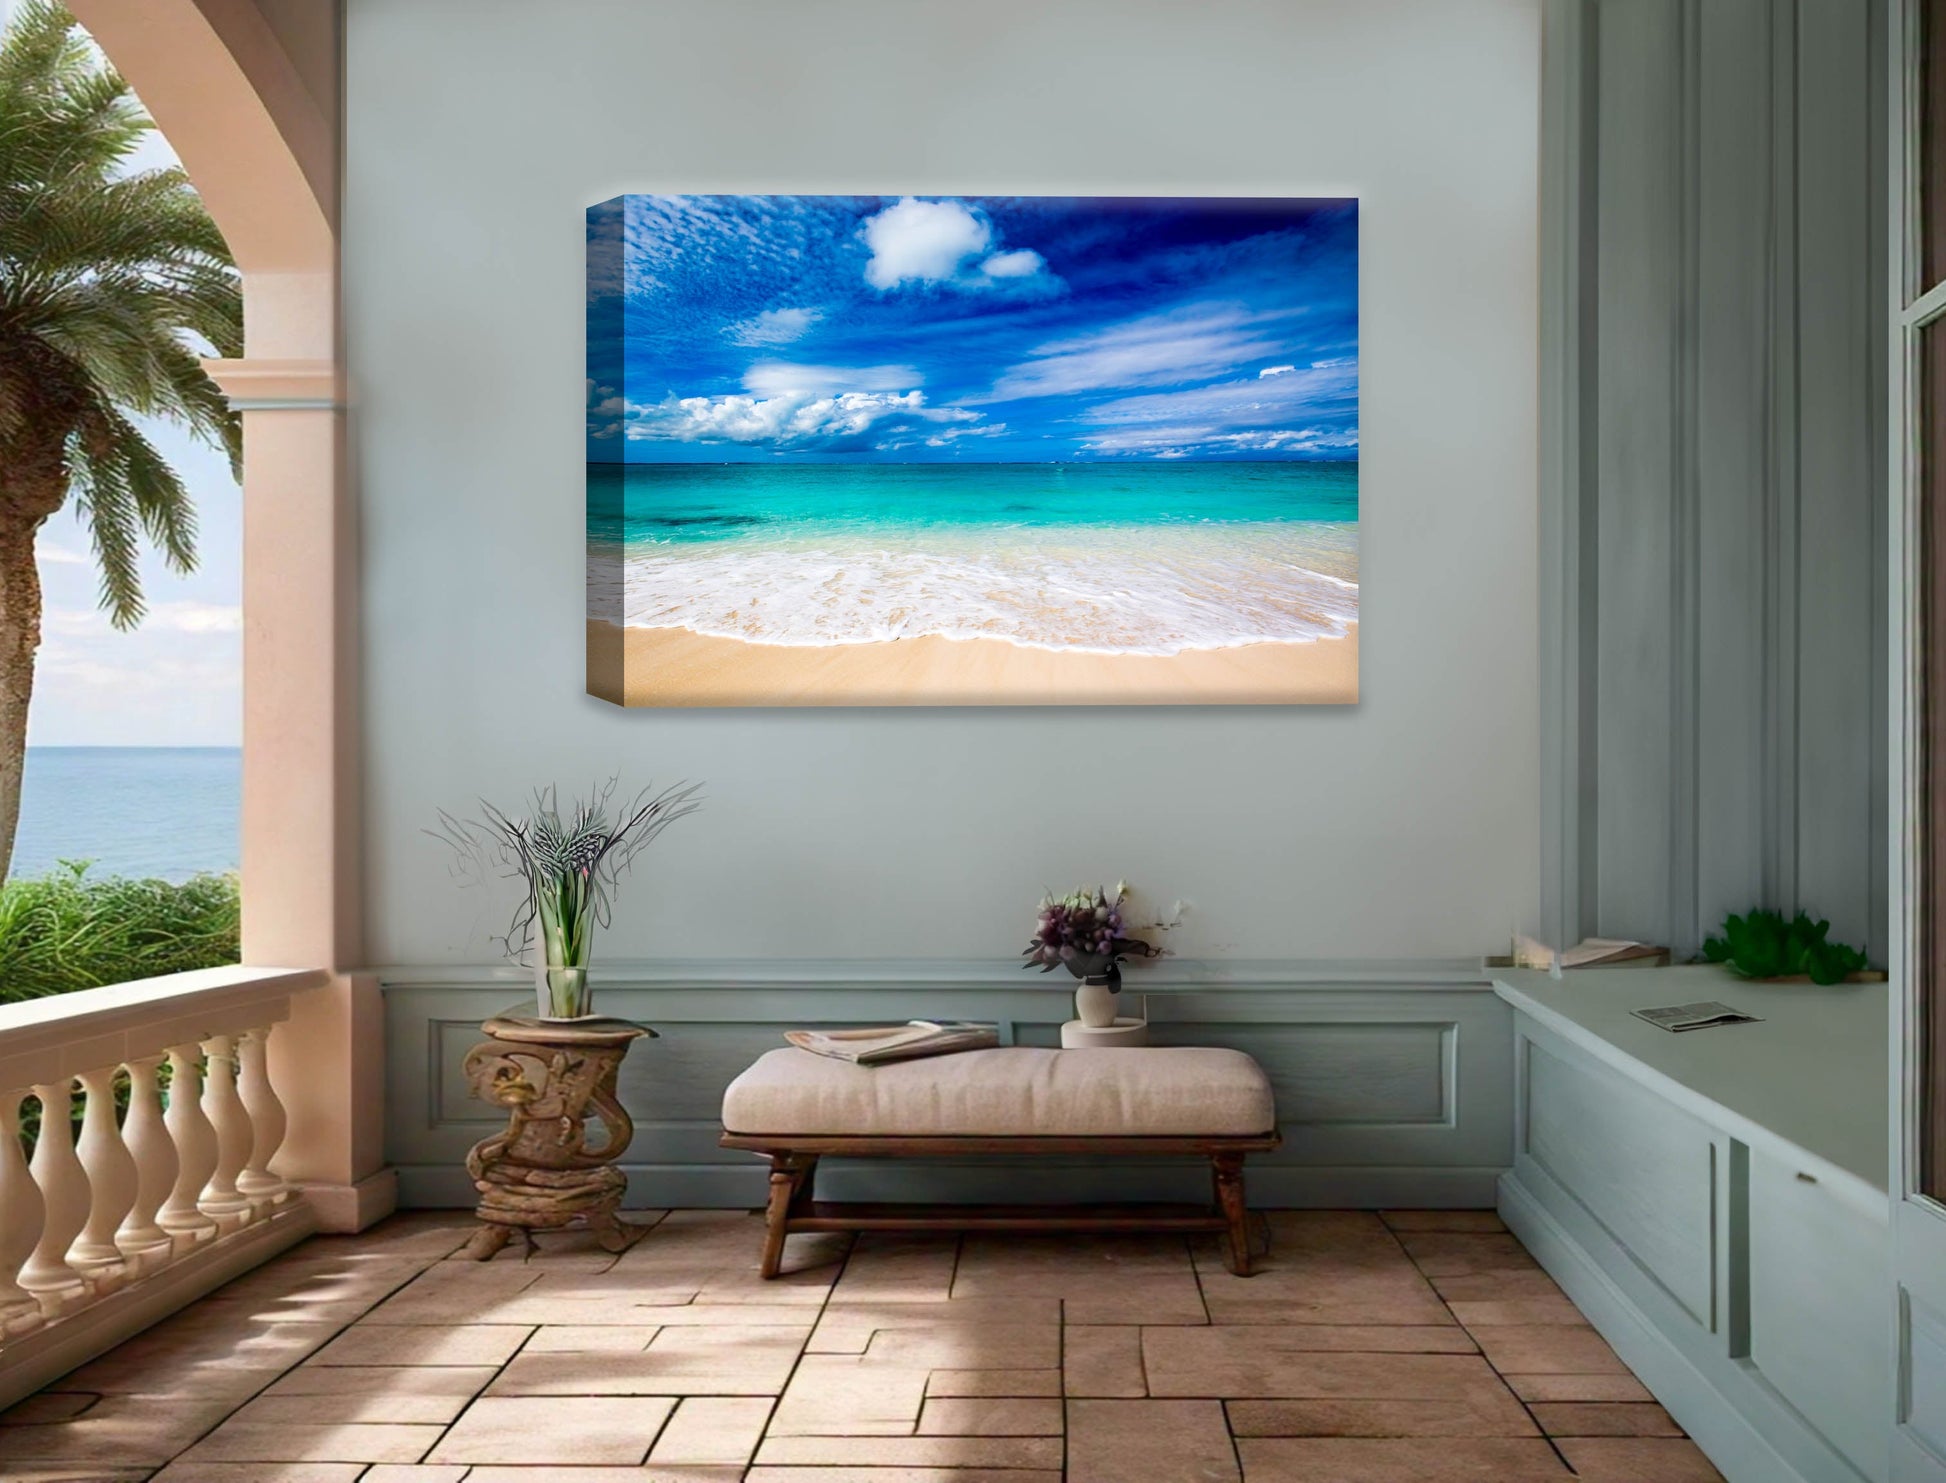 White Sand Beach - Evening on the Pond - Canvas Wrap - Waterproof on Patio 5 Wall